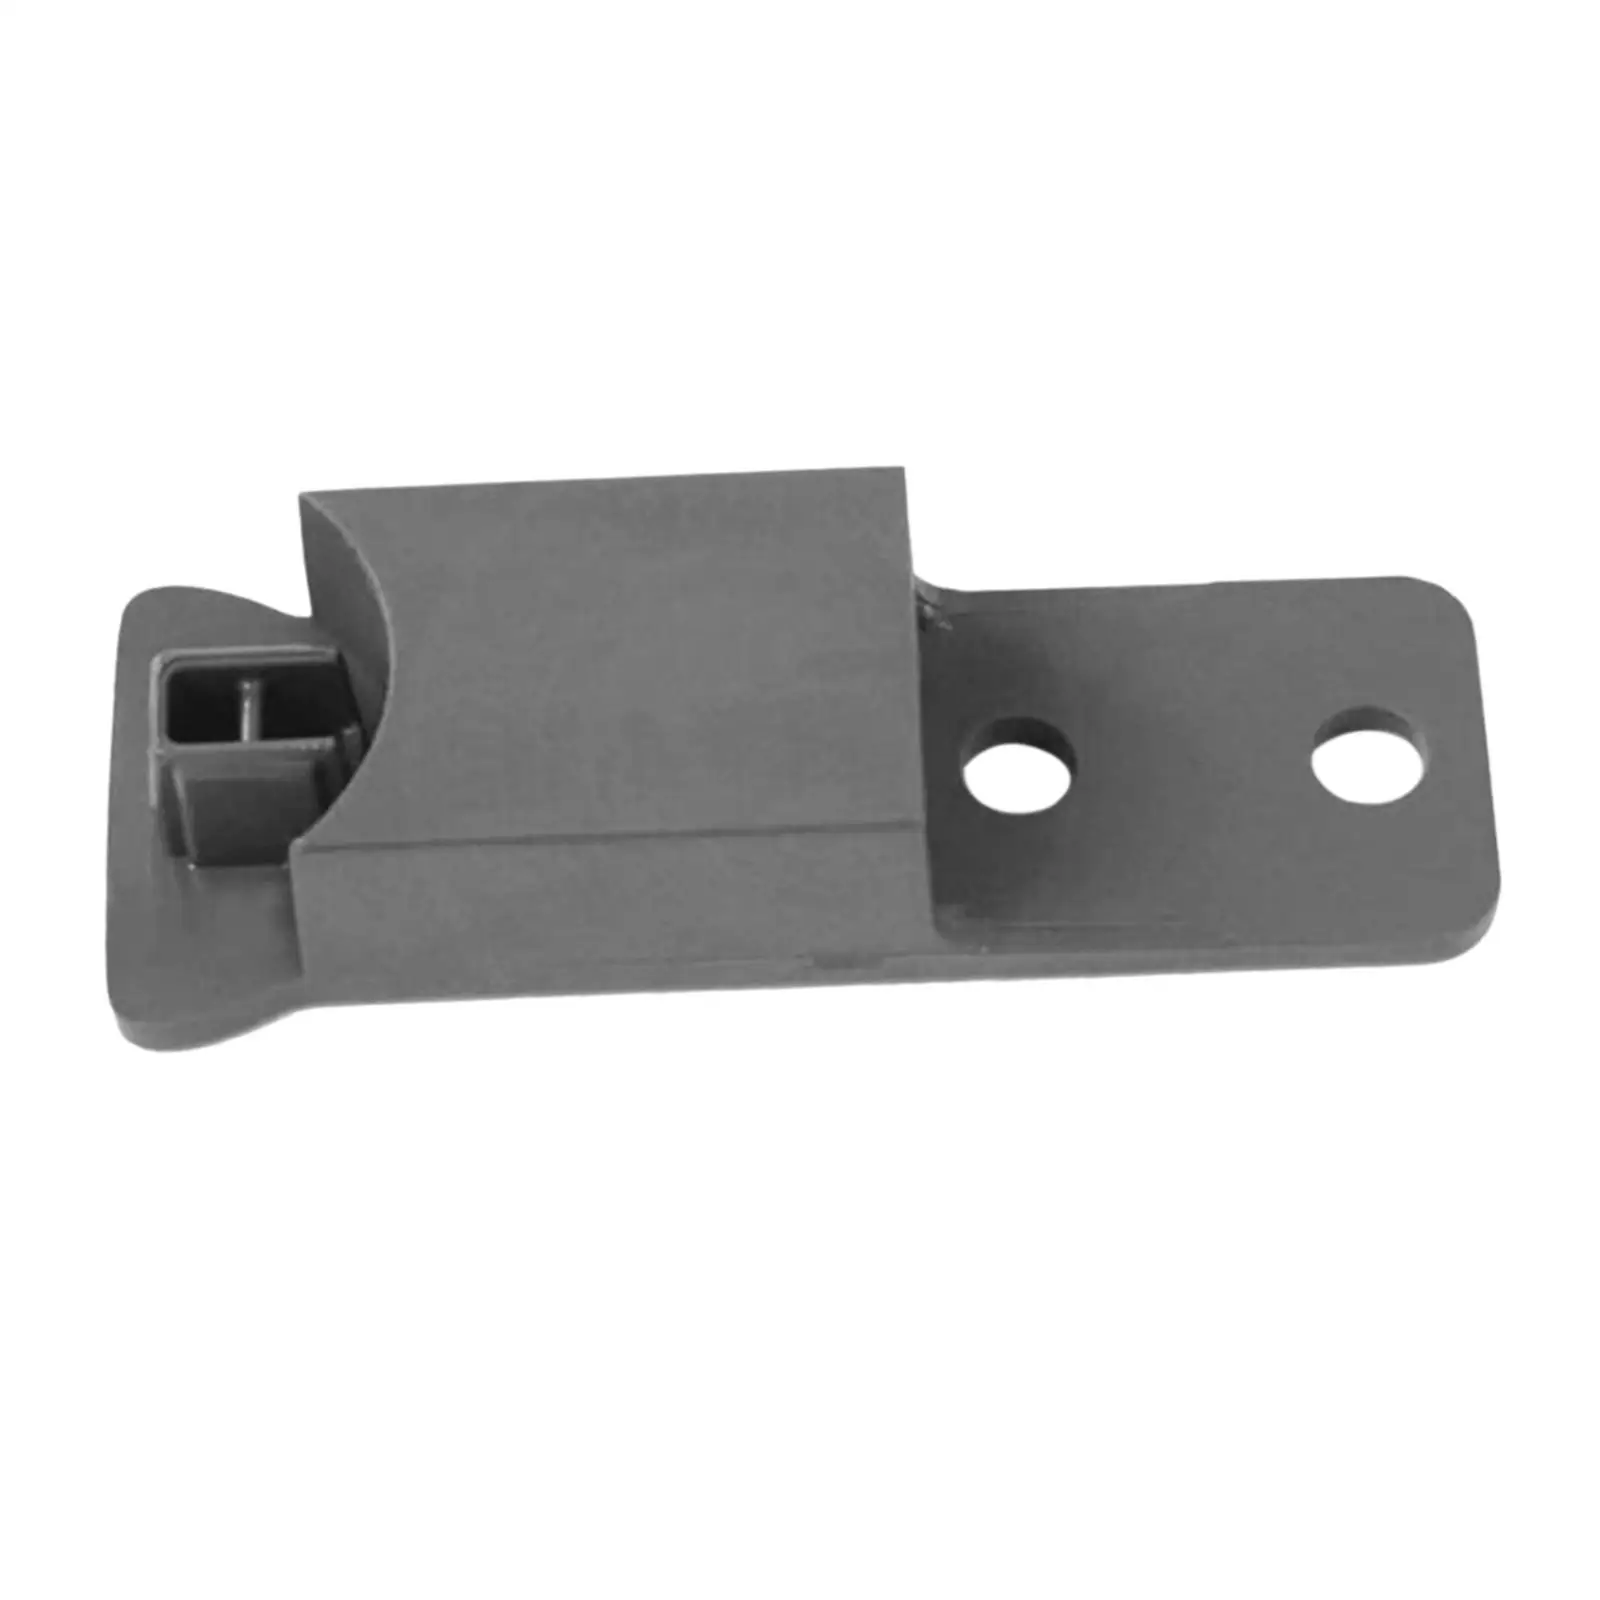 Handle End Cap Direct Replaces Accessory Appliance Cap W10917049 AP6036240 W10838116 for Whirlpool Refrigerator